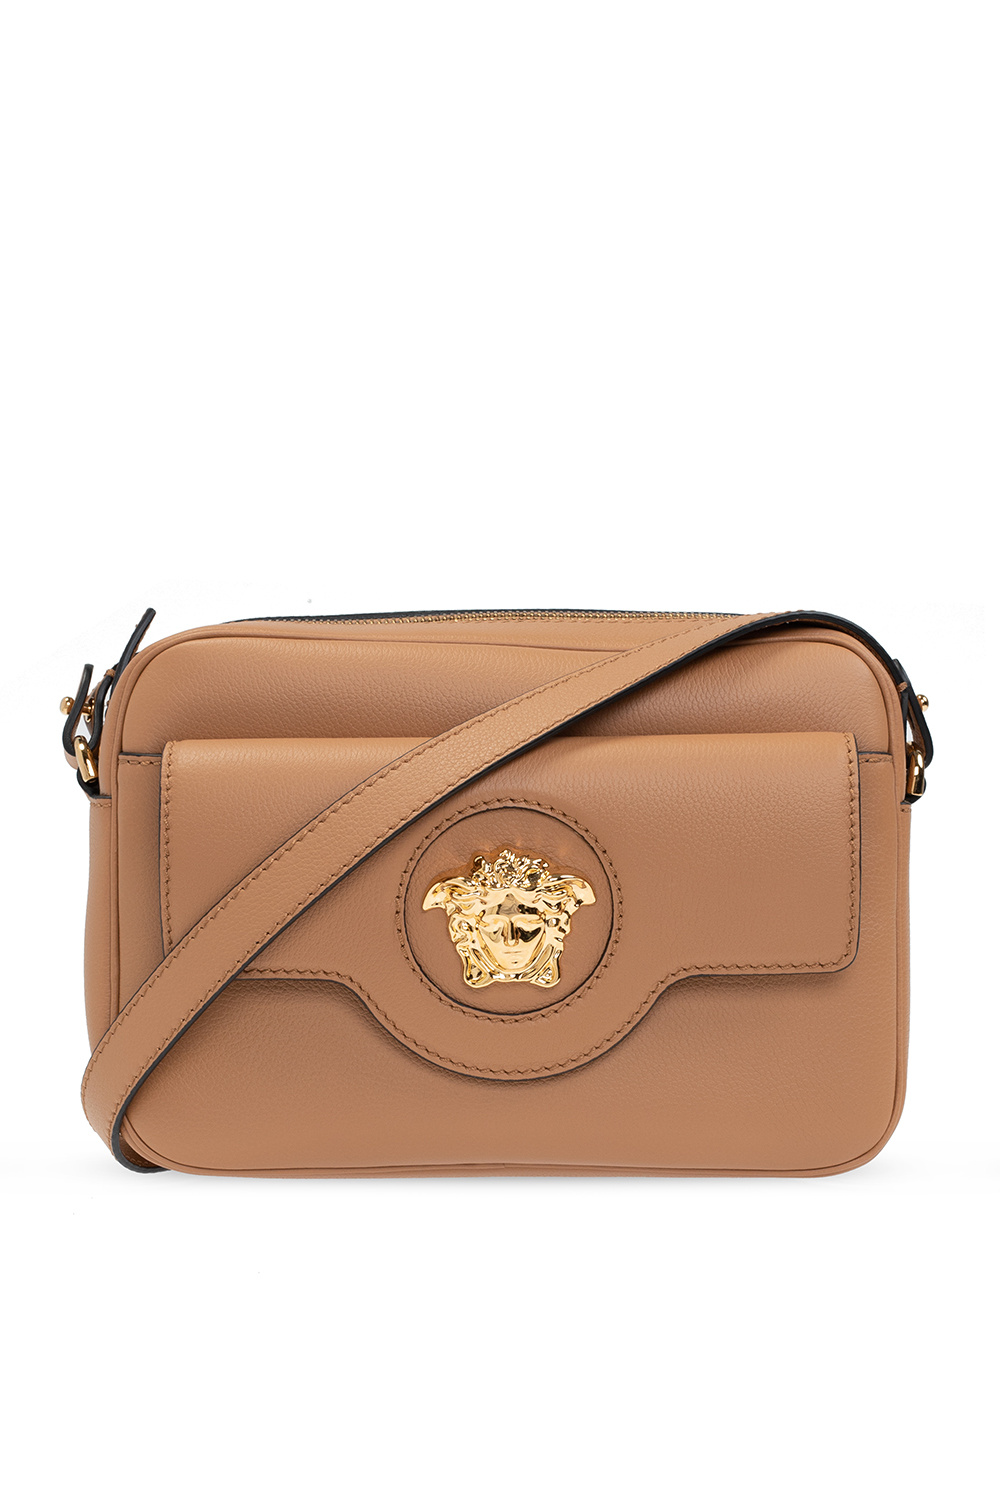 Buy Guess Katey Mini Satchel Brown Bag from the Next UK online shop